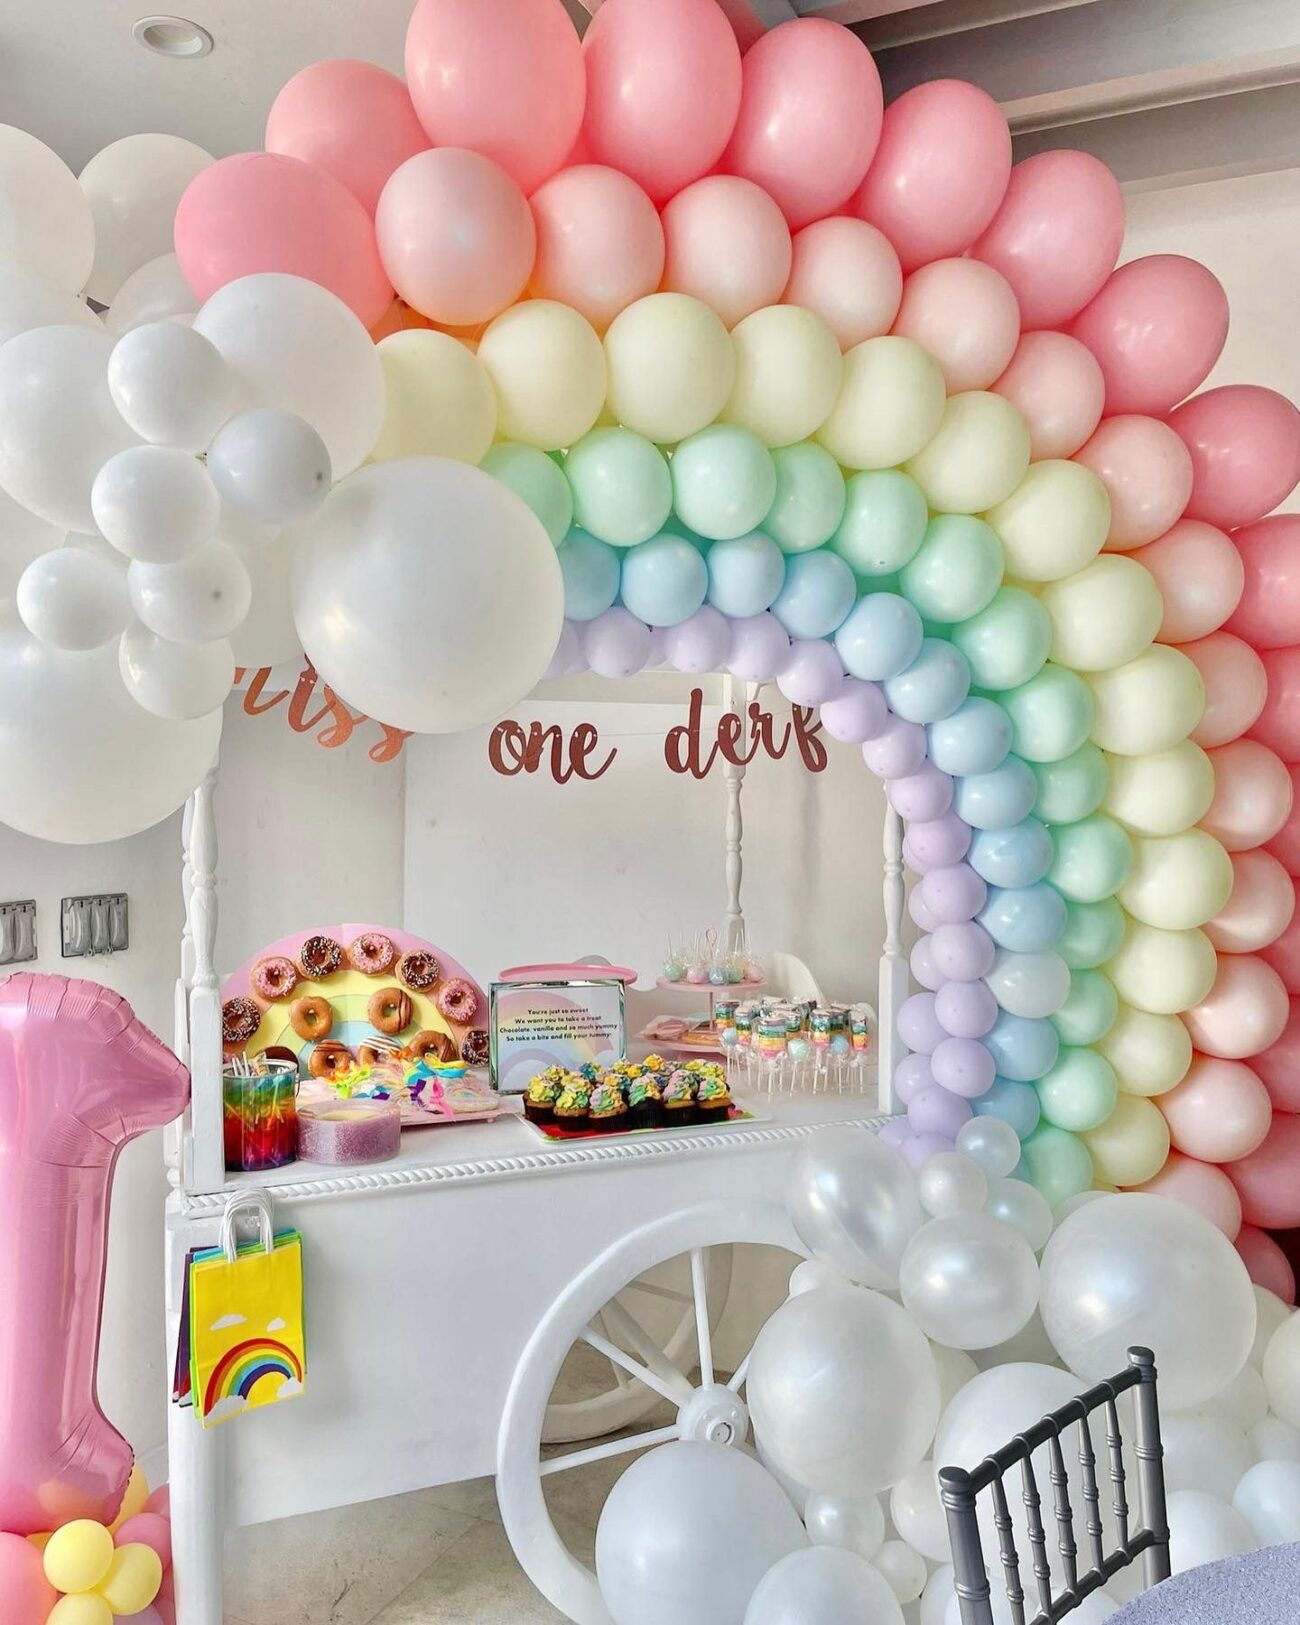 Balloons Decoration Rainbow and clouds - Balloons By Luz Paz ...